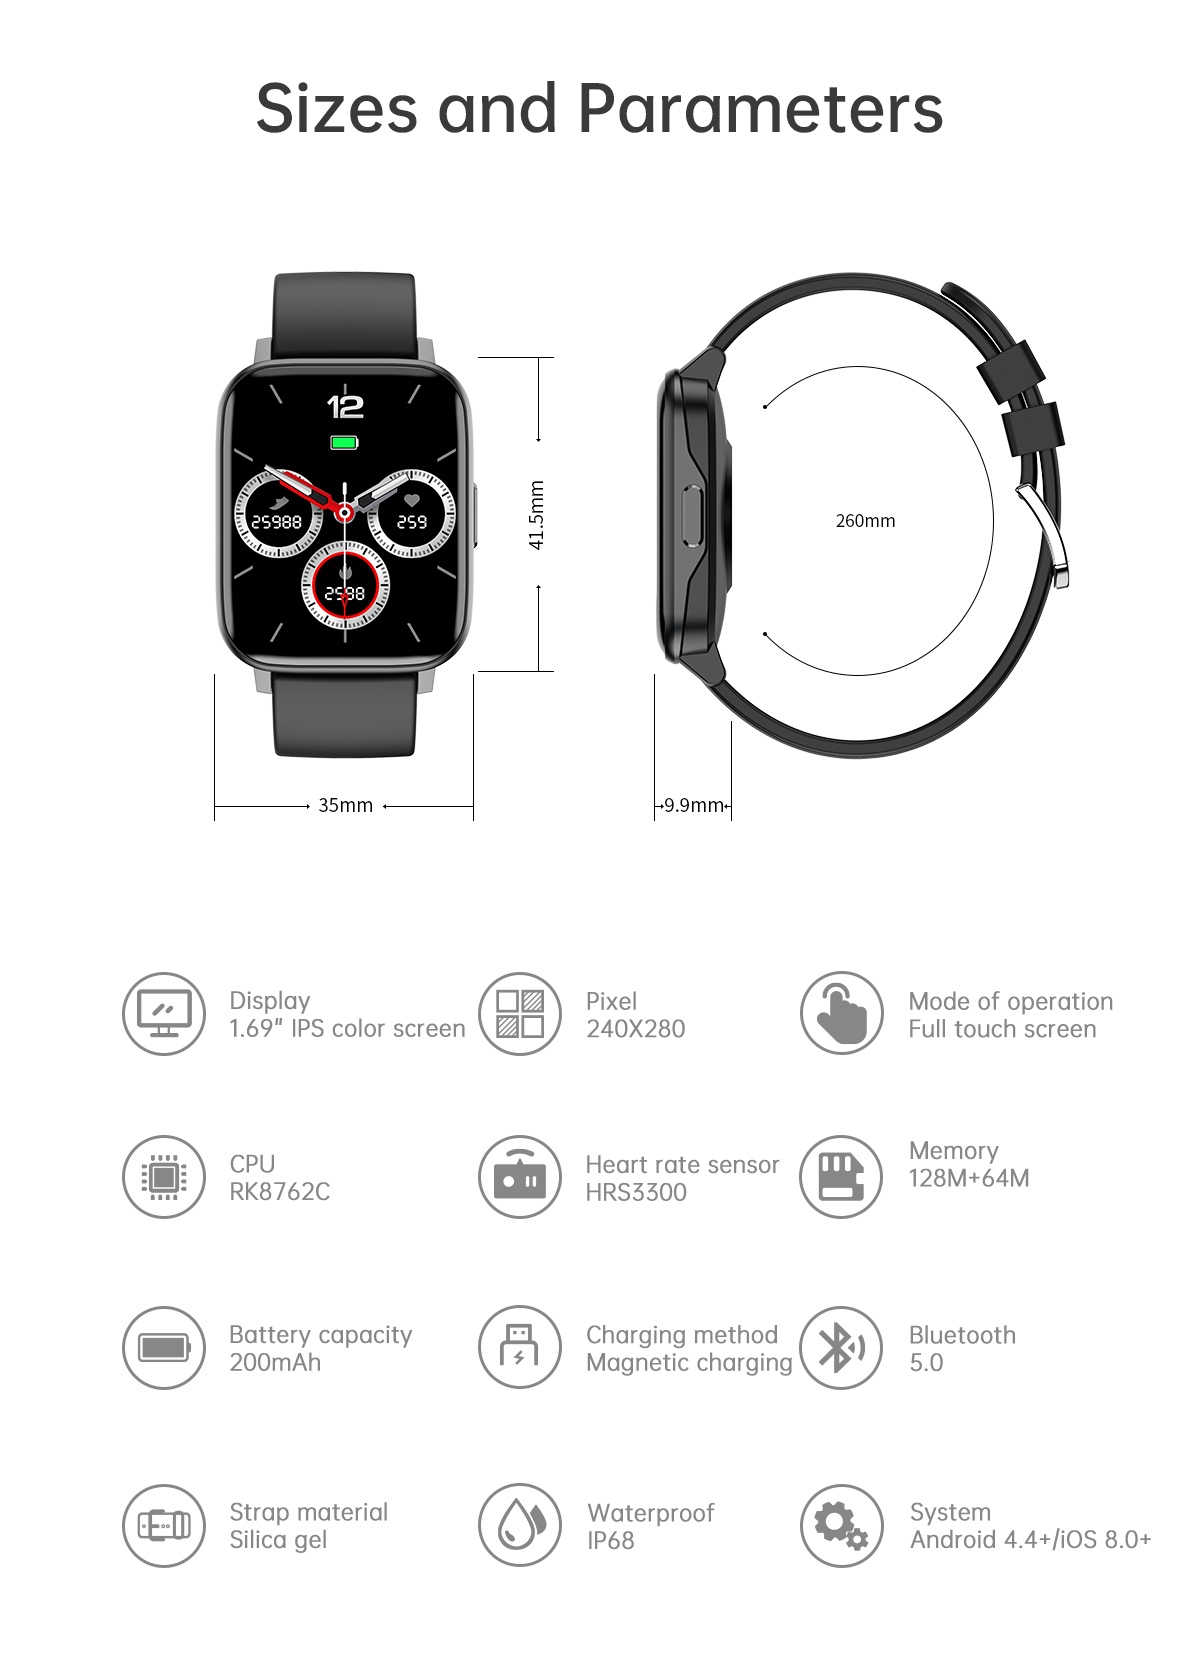 Utelite new Gw24 sports smart watch 1.69 inch square screen Ip68 waterproof long time standby heart rate blood pressure monitoring fitness tracker